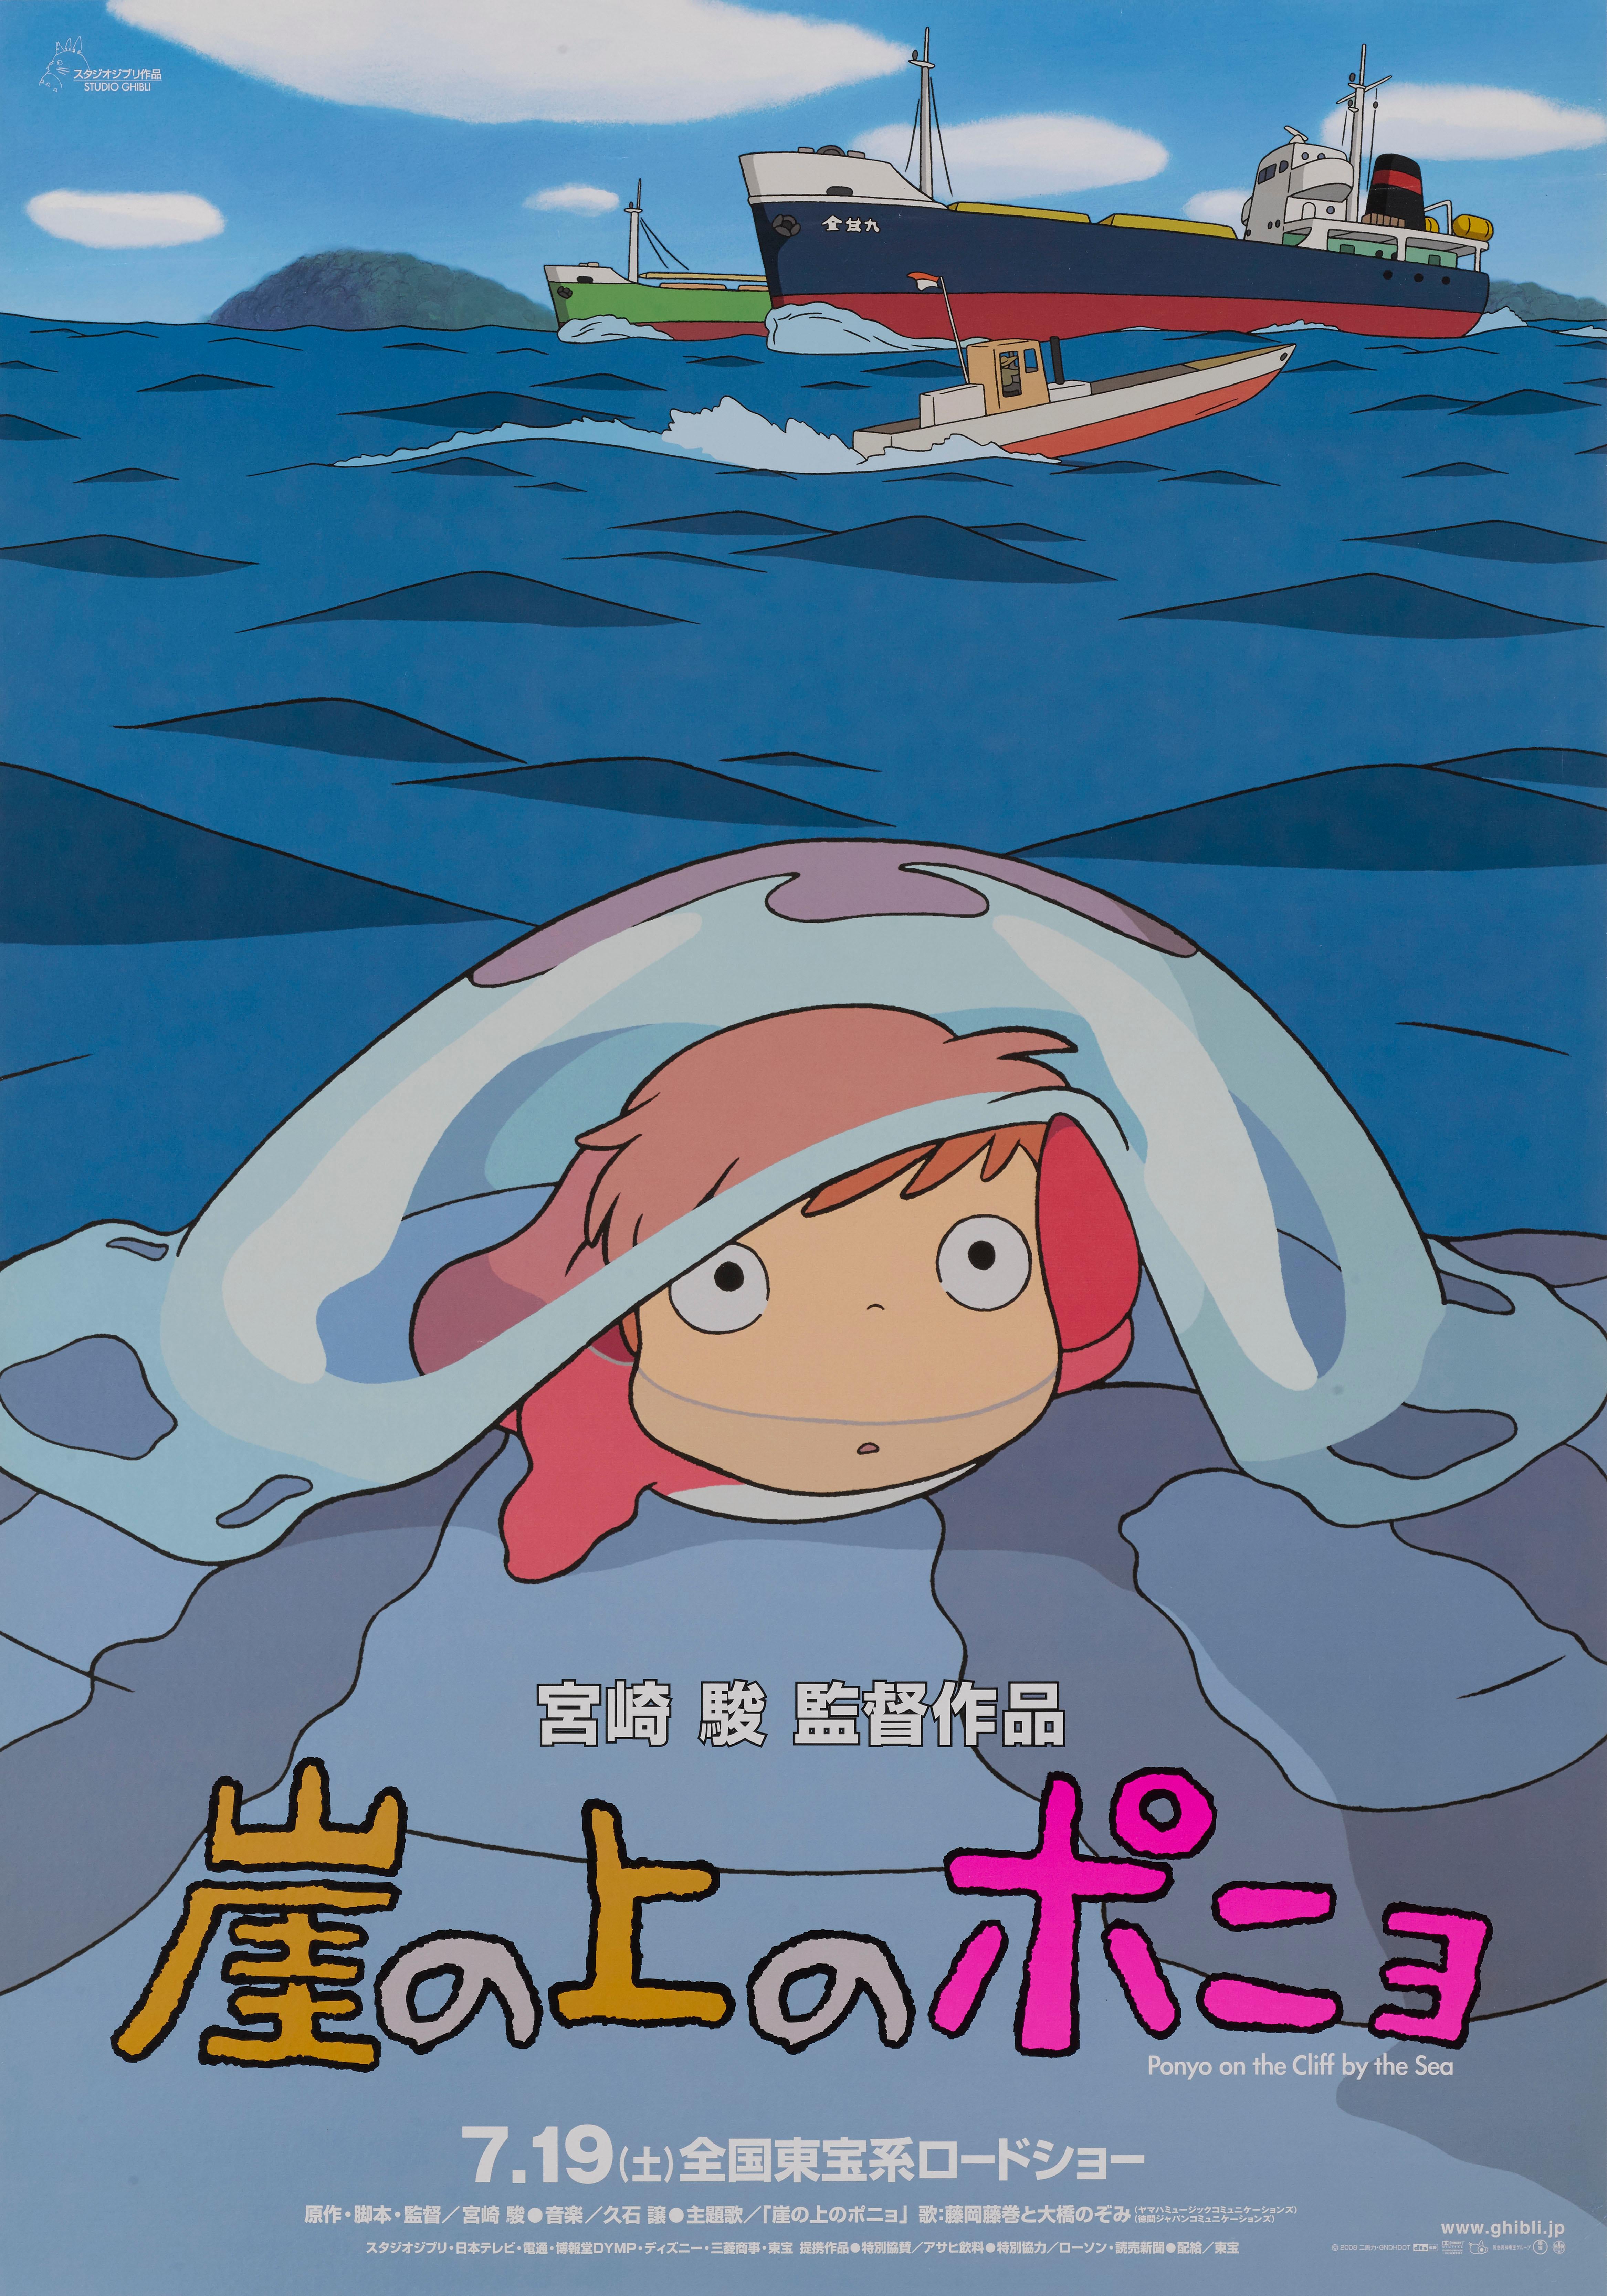 Original Japanese film poster for the 2008 Studio Ghibli Animation.
The regular Japanese posters are 28 x 20 inches this is the larger rarer format.
 